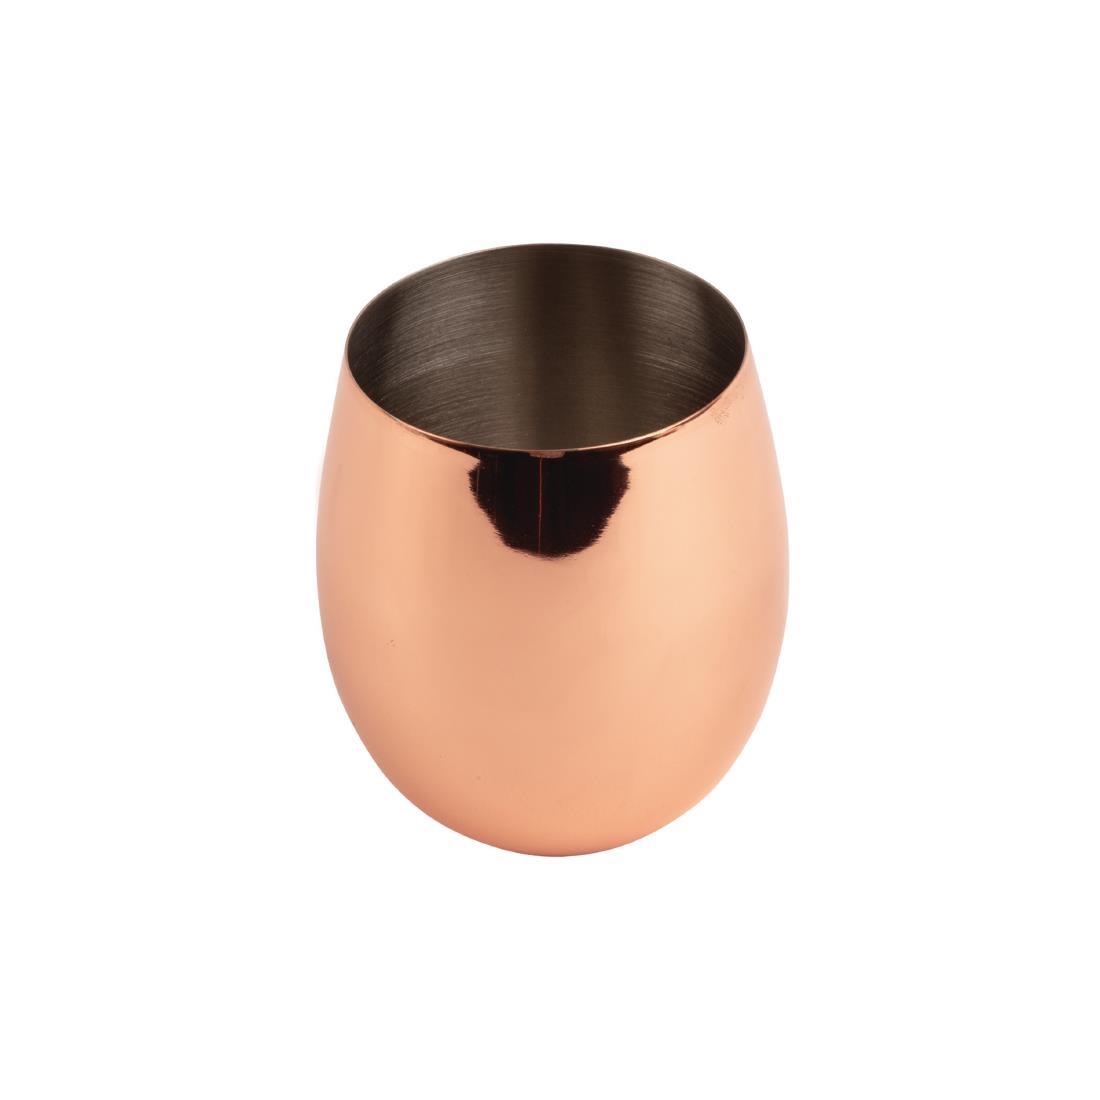 Olympia Curved Tumbler 340ml Copper - DR611  - 2